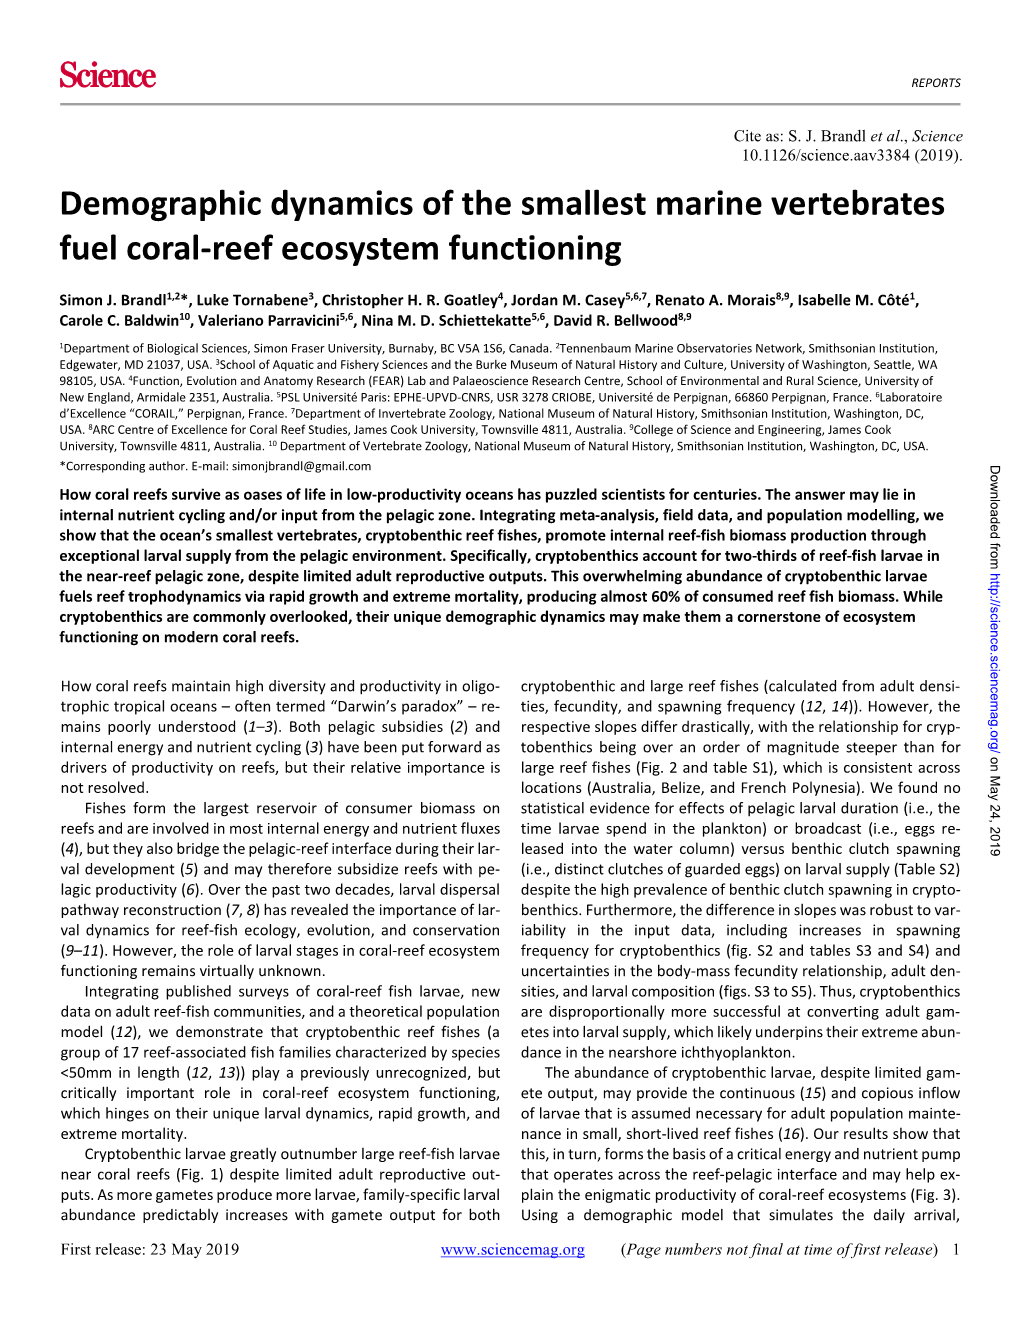 Demographic Dynamics of the Smallest Marine Vertebrates Fuel Coral-Reef Ecosystem Functioning